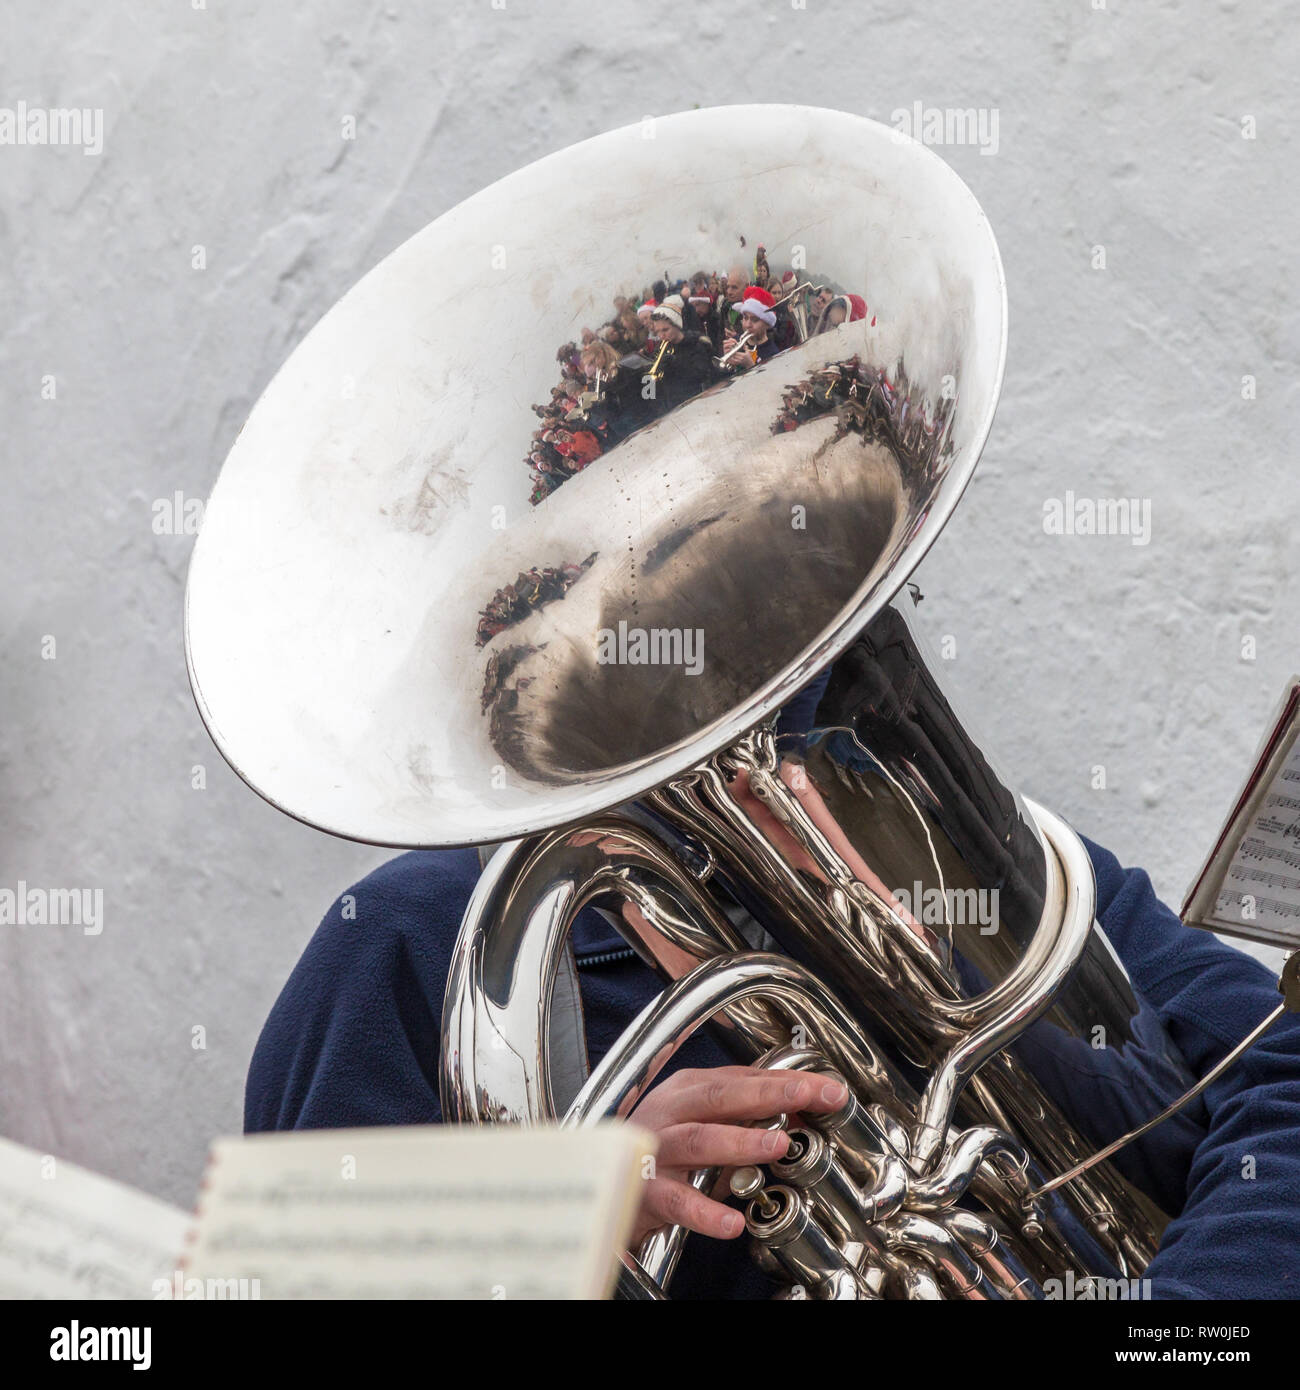 Tuba player from Bollington brass band playing carols on Christmas morning on White Nancy.  People with Christmas hats reflected in the Tuba Stock Photo